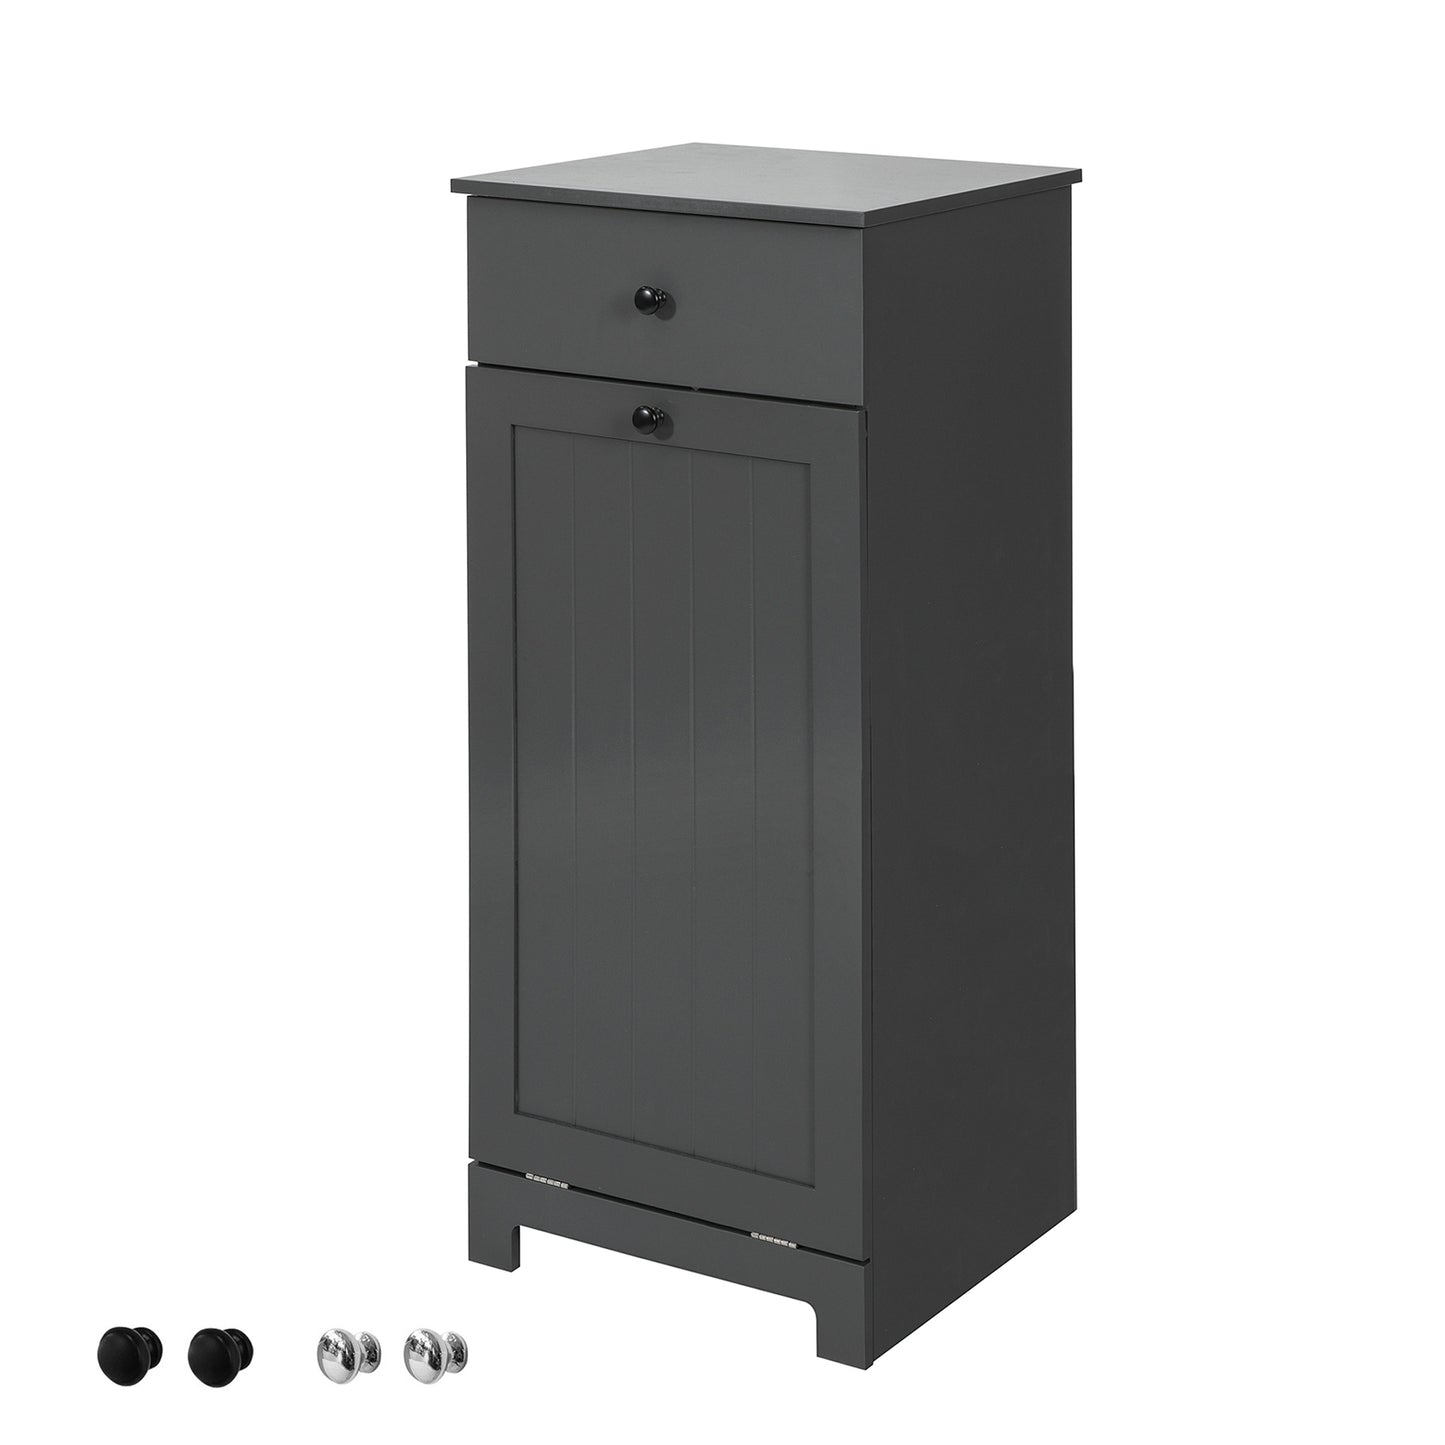 SoBuy Laundry Cabinet with Basket and Drawer, Tilt-Out Laundry Hamper, Storage Cabinet